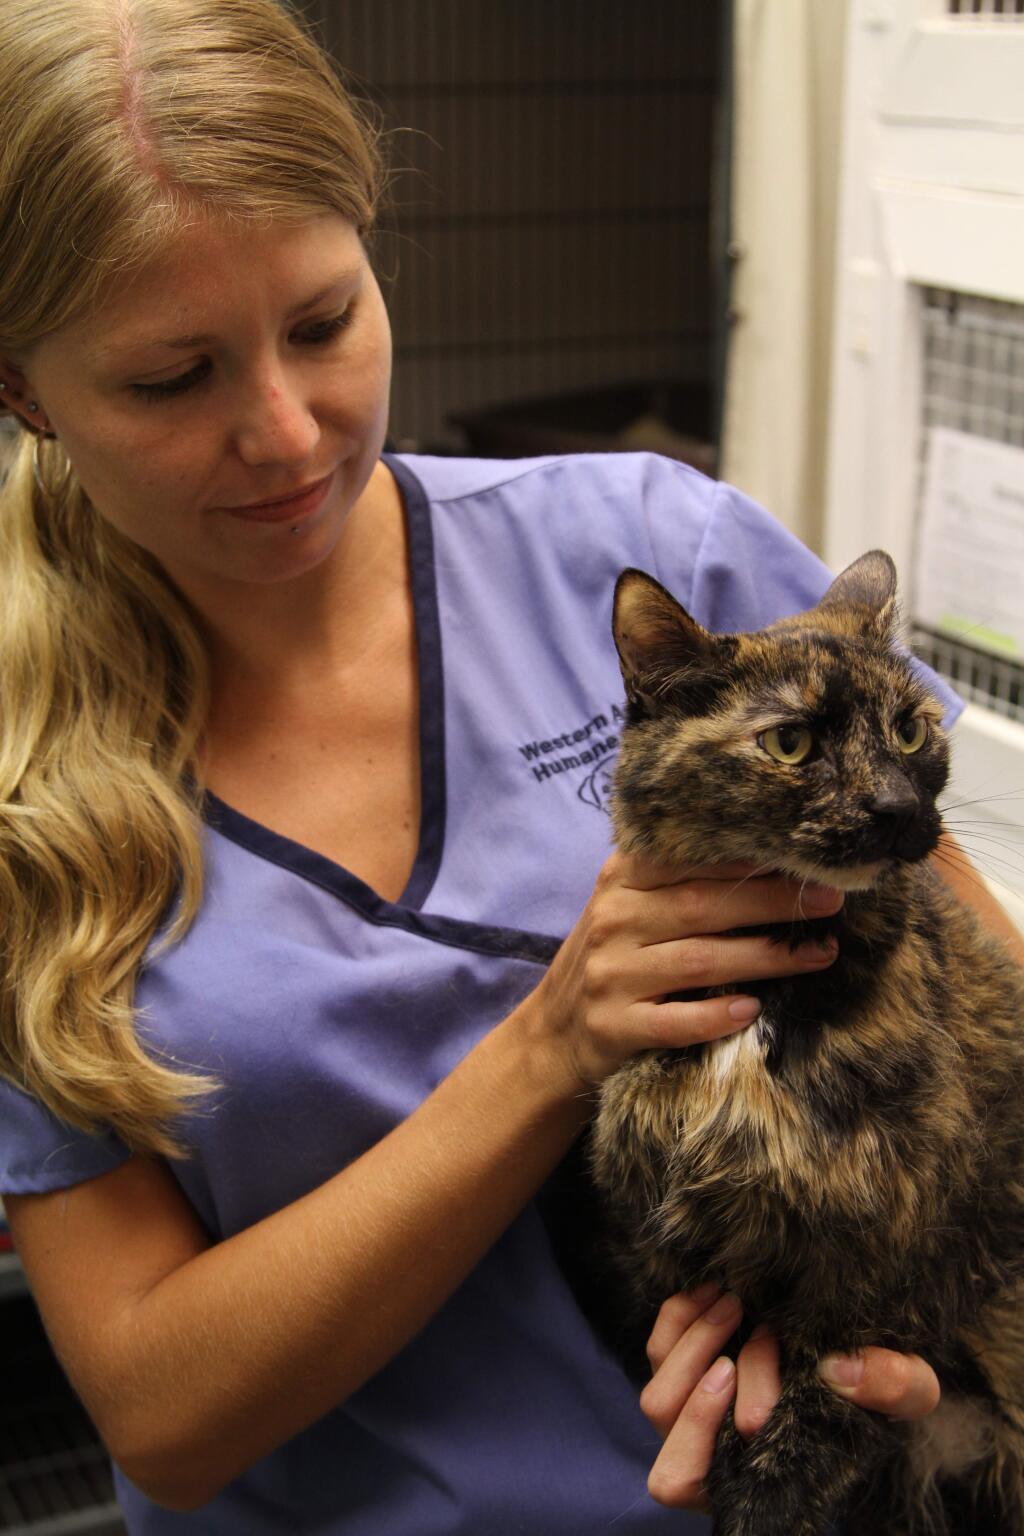 Western Arizona Humane Society receptionist Tasha Draper holds River, a cat who was found inside a sunken boat on Saturday, in Lake Havasu City, Ariz., on Monday, July 27, 2015. The cat was found tucked away in a boat that had sank to the bottom of Lake Havasu on Saturday and was brought ashore by Dive Time Recovery owner John Zucalla. Zucalla said the cat must have stowed away sometime before Boat owner Genaro Rudaldava left Orange County, Calif. (Brandon Messick/Todays News Herald, Brandon Messick)